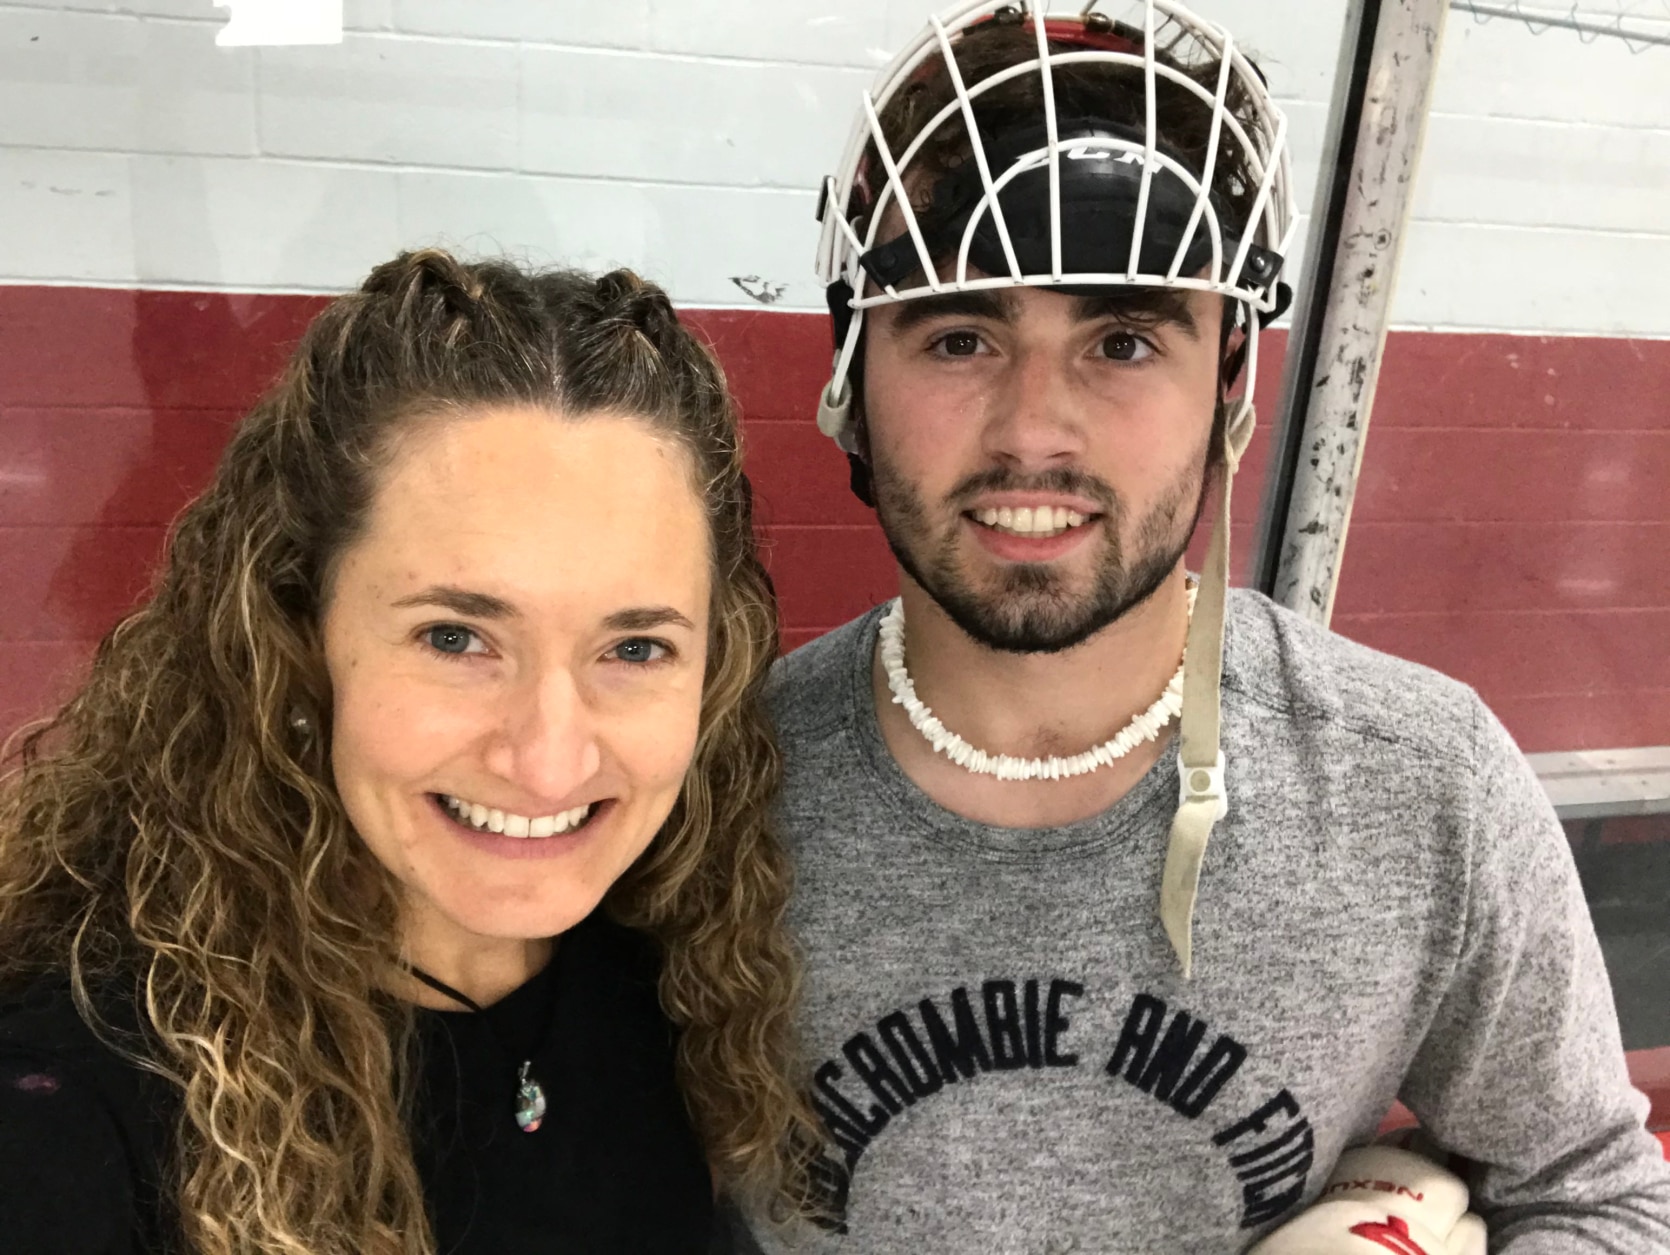 Gage Senter and Stacey Sirotta spend some time on the ice.